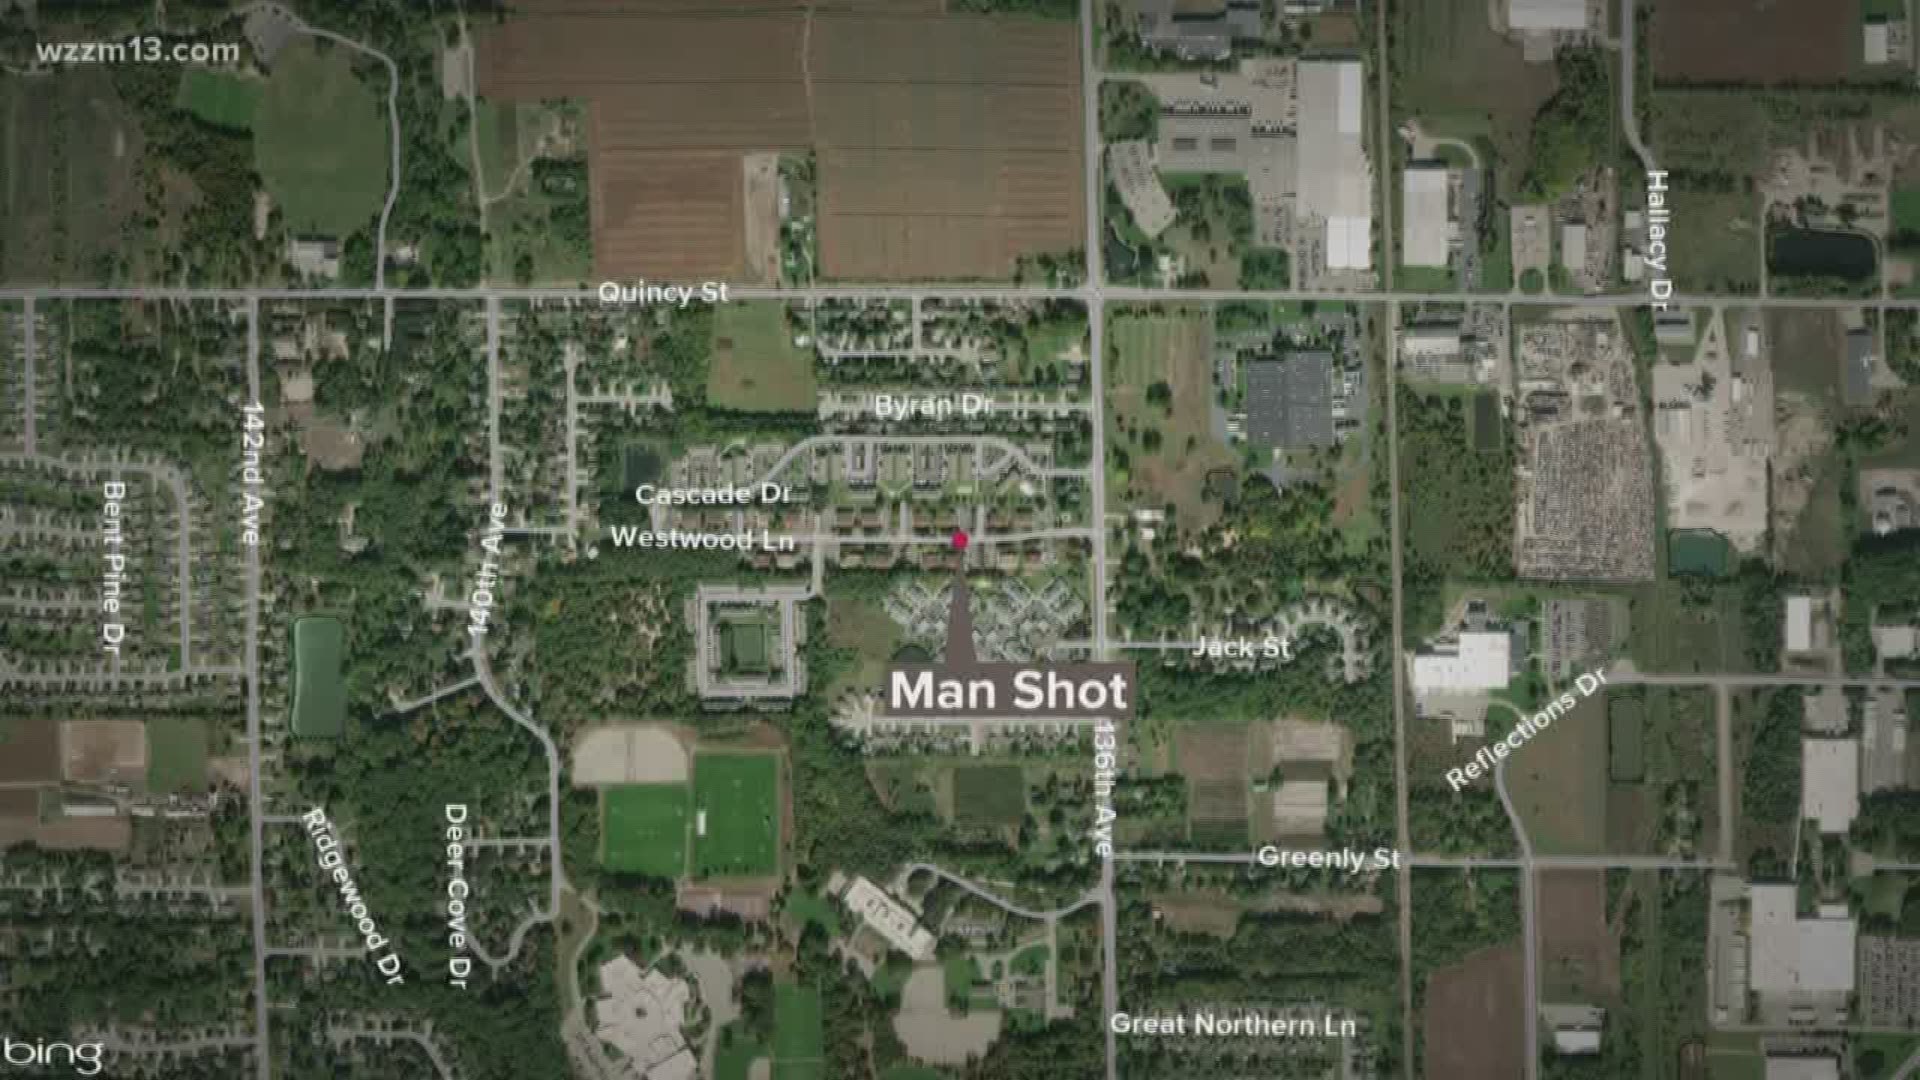 Deputies in Ottawa County responded to a shooting early Sunday.